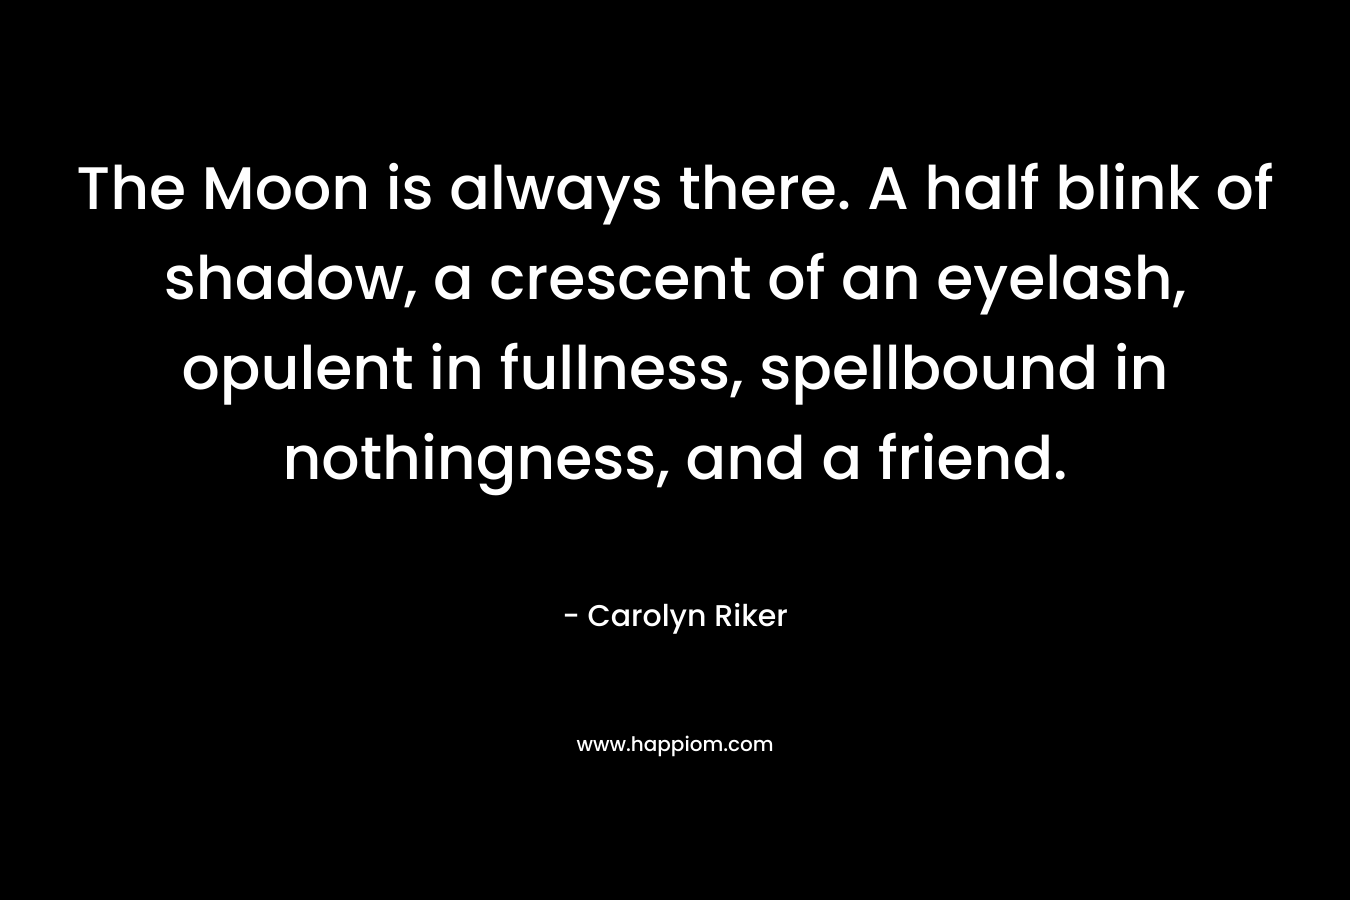 The Moon is always there. A half blink of shadow, a crescent of an eyelash, opulent in fullness, spellbound in nothingness, and a friend. – Carolyn Riker